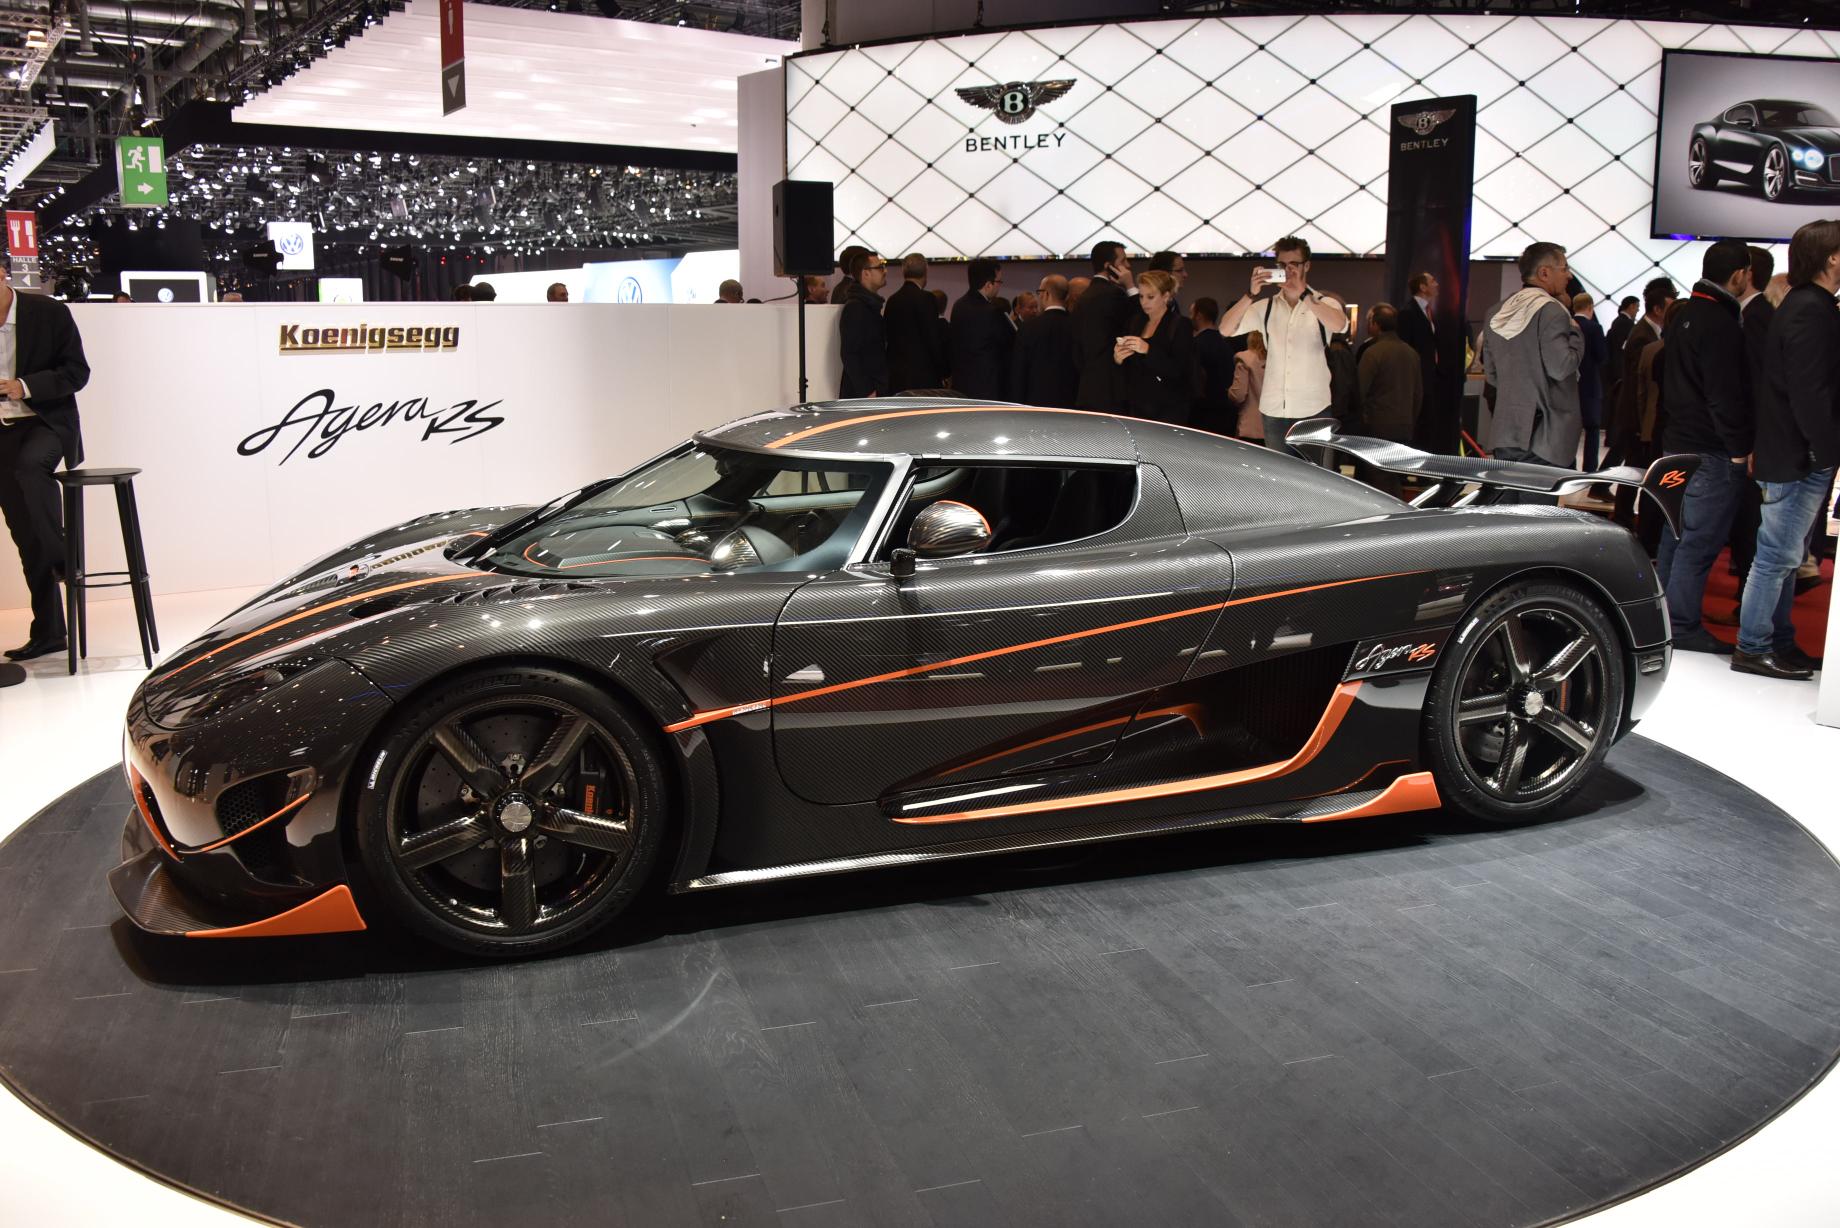 Top 7 Fastest Cars In The World - Koenigsegg Agera RS